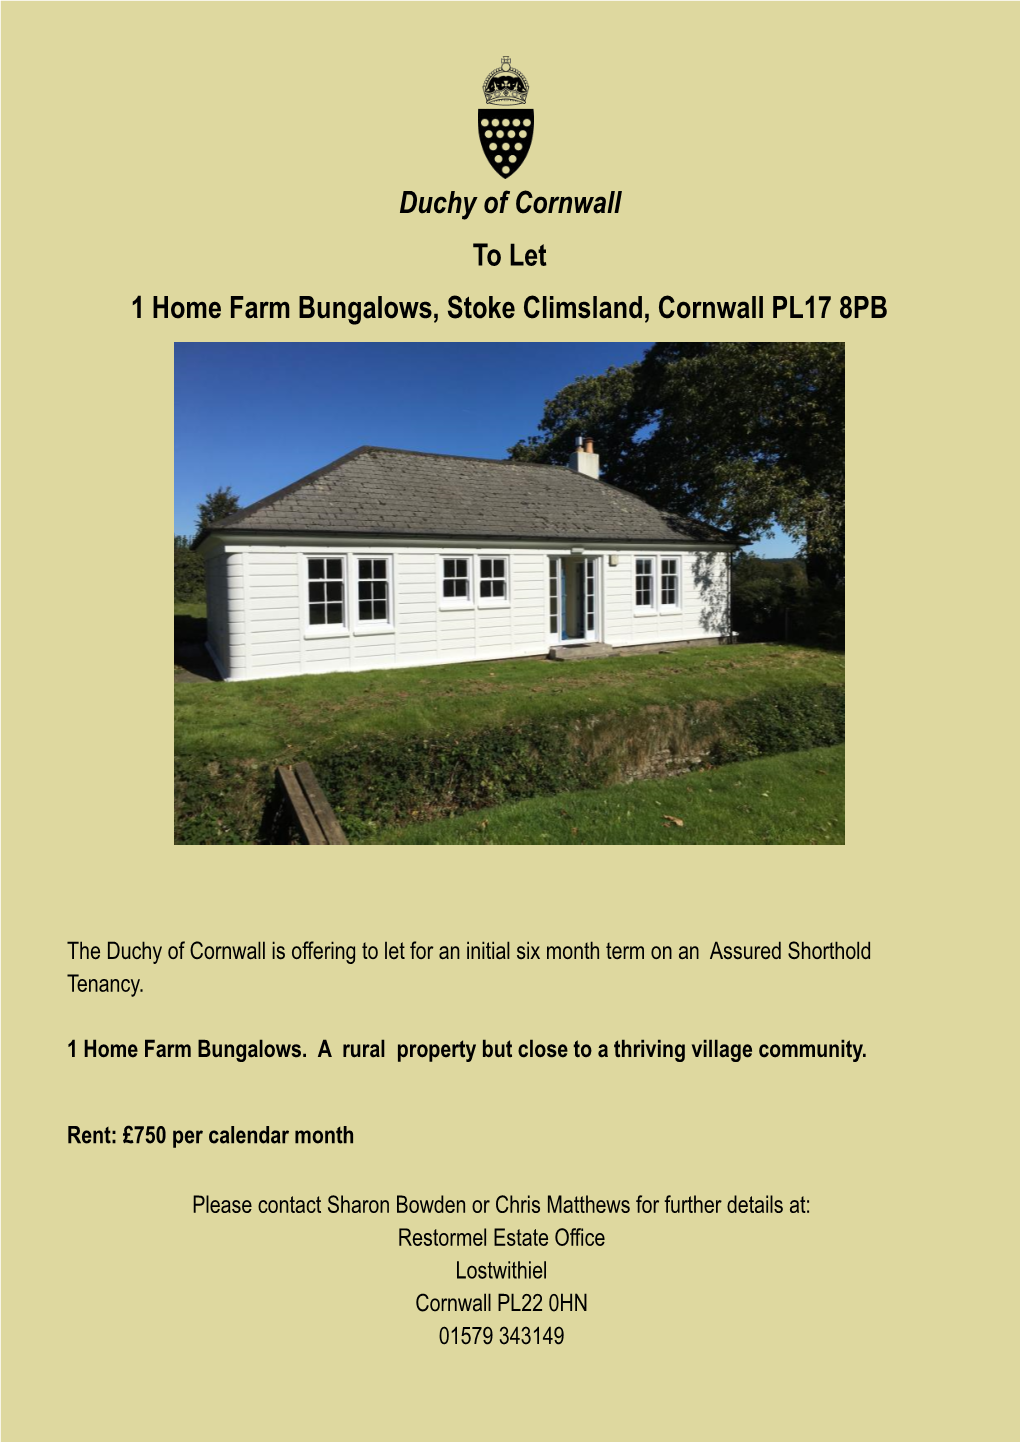 Duchy of Cornwall to Let 1 Home Farm Bungalows, Stoke Climsland, Cornwall PL17 8PB